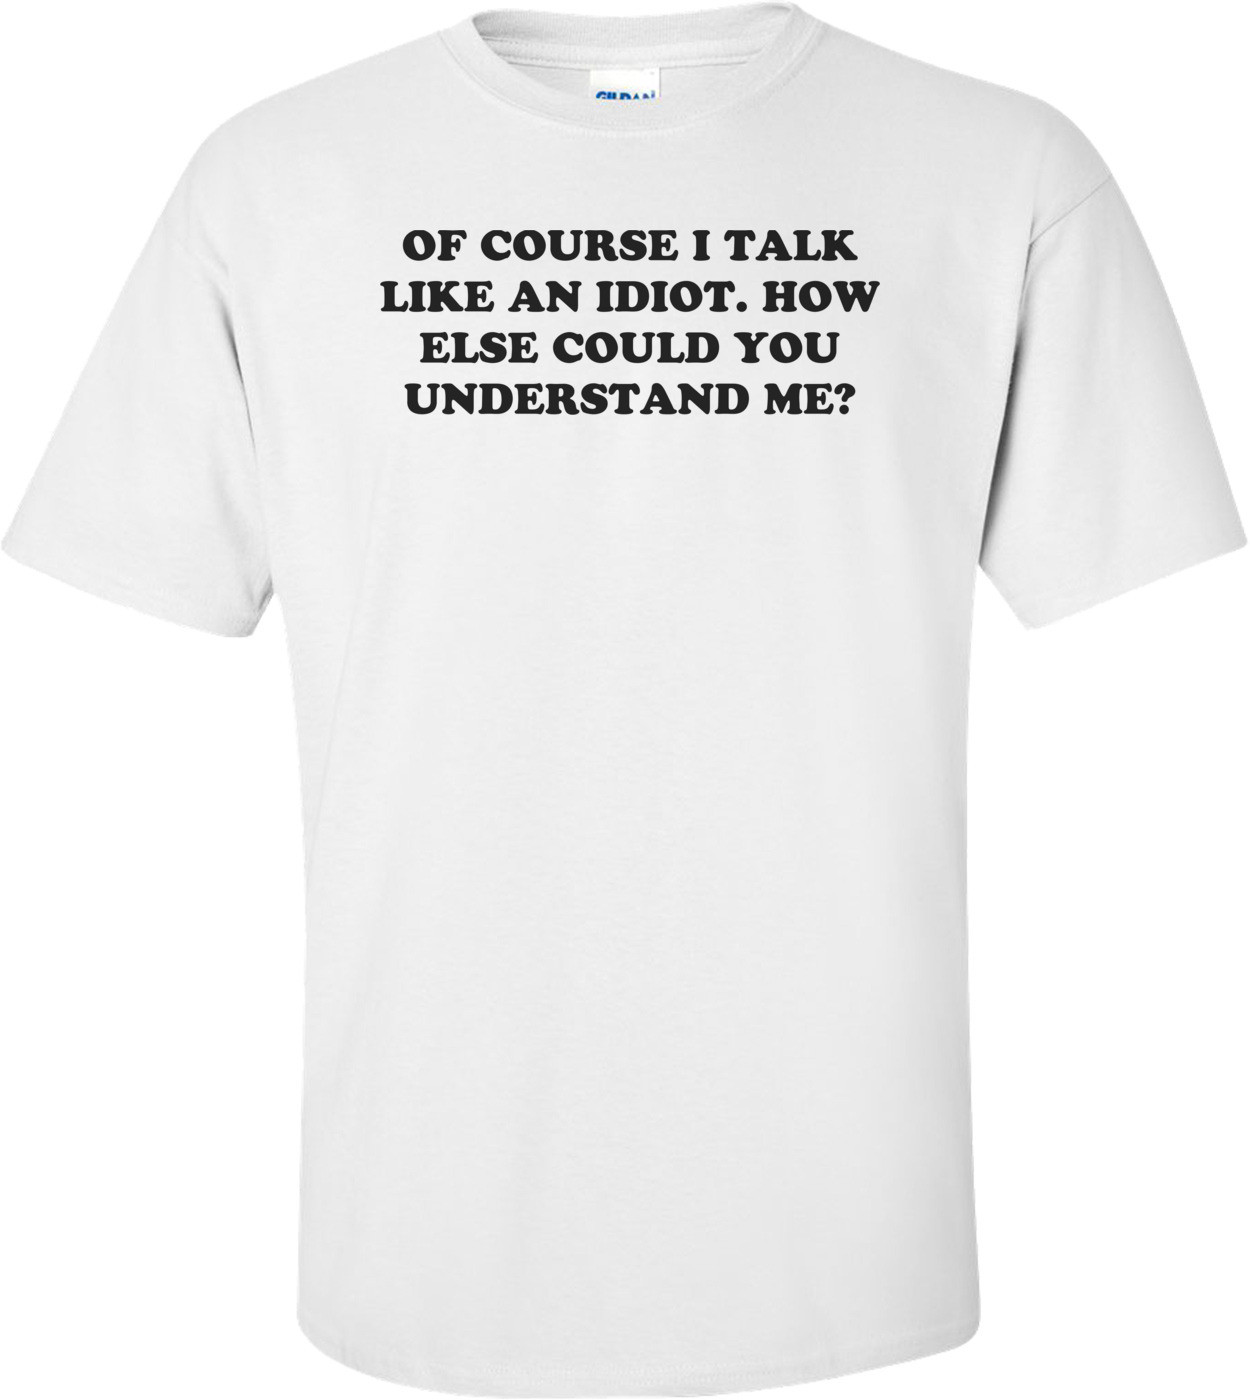 OF COURSE I TALK LIKE AN IDIOT. HOW ELSE COULD YOU UNDERSTAND ME? Shirt